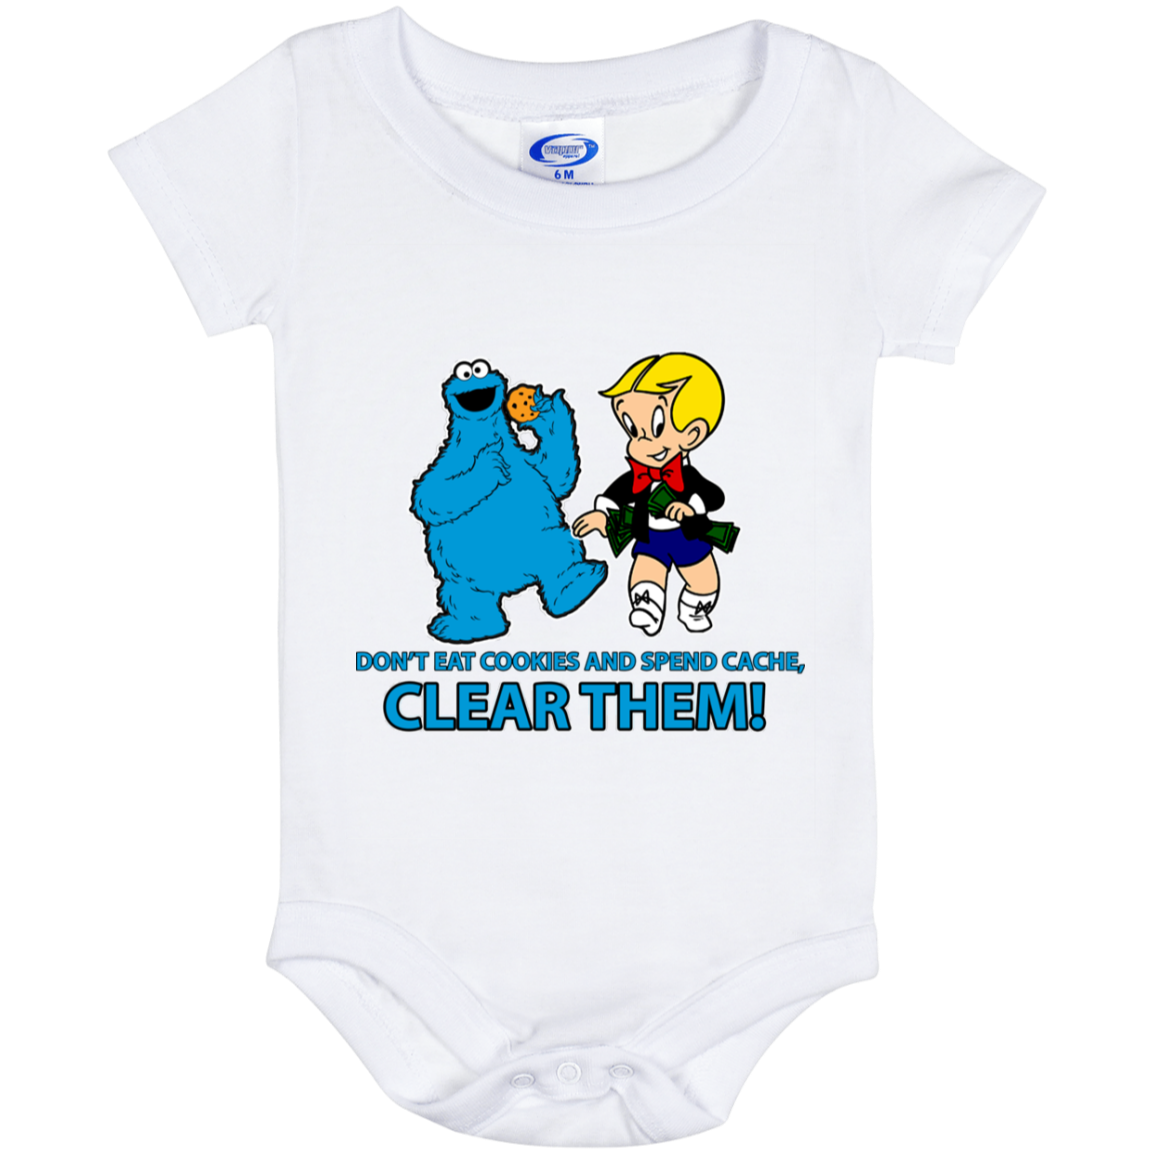 ArtichokeUSA Custom Design. Don't Eat Cookies And Spend Cache! Delete Them! Cookie Monster and Richie Rich Fan Art/Parody. Baby Onesie 6 Month